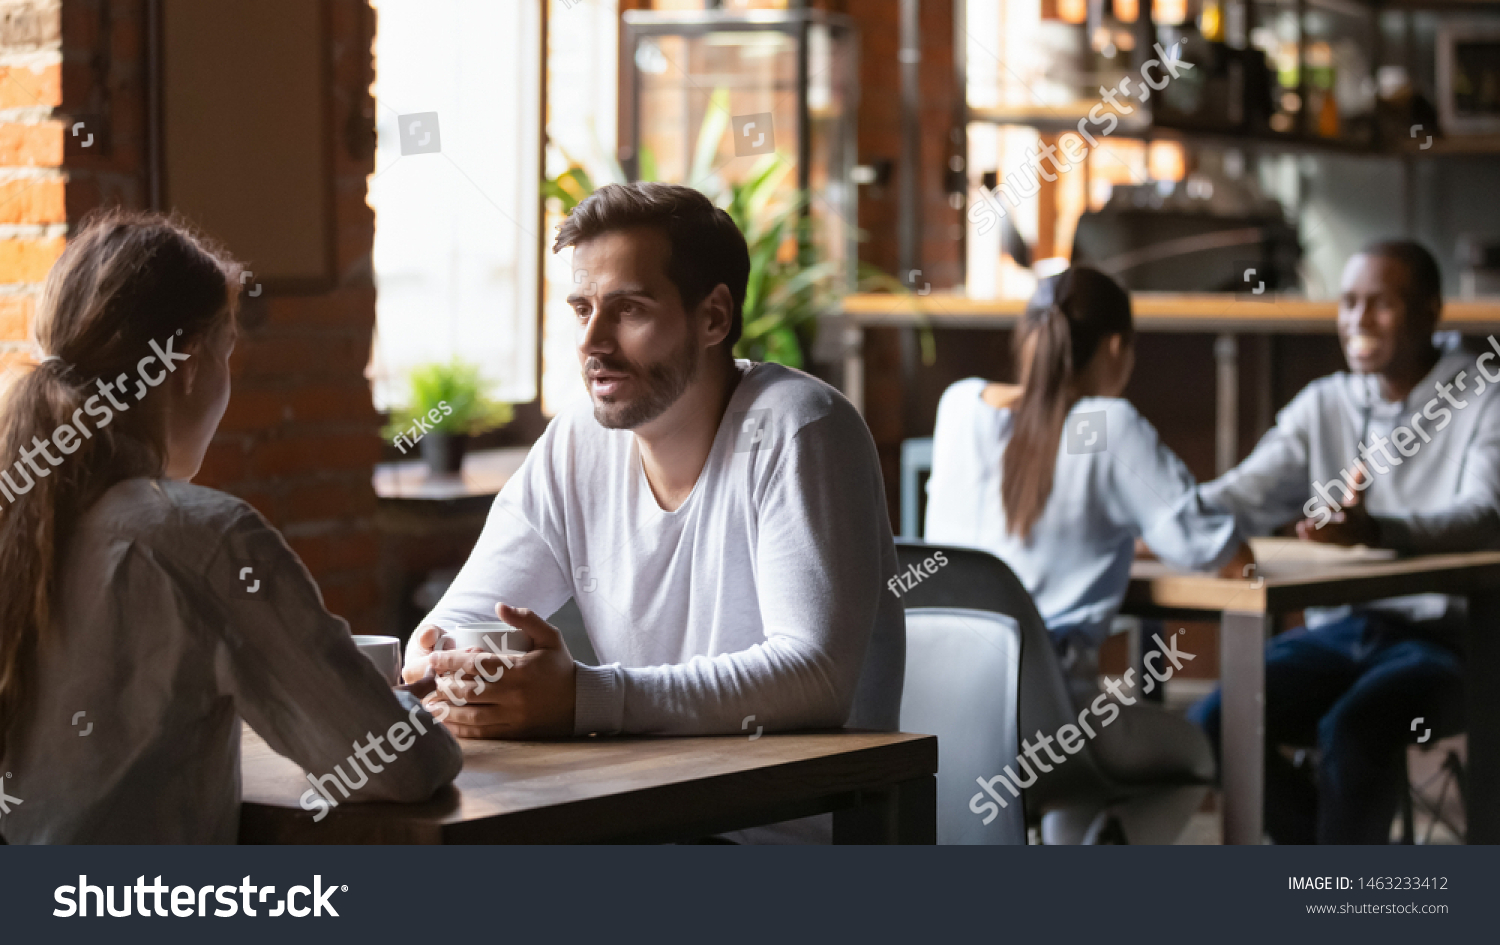 Millennial couple sit at cafe table drinking hot coffee talking discussing things, diverse young men and women meeting in coffeehouse speaking get acquainted taking part in speed dating. Love concept #1463233412